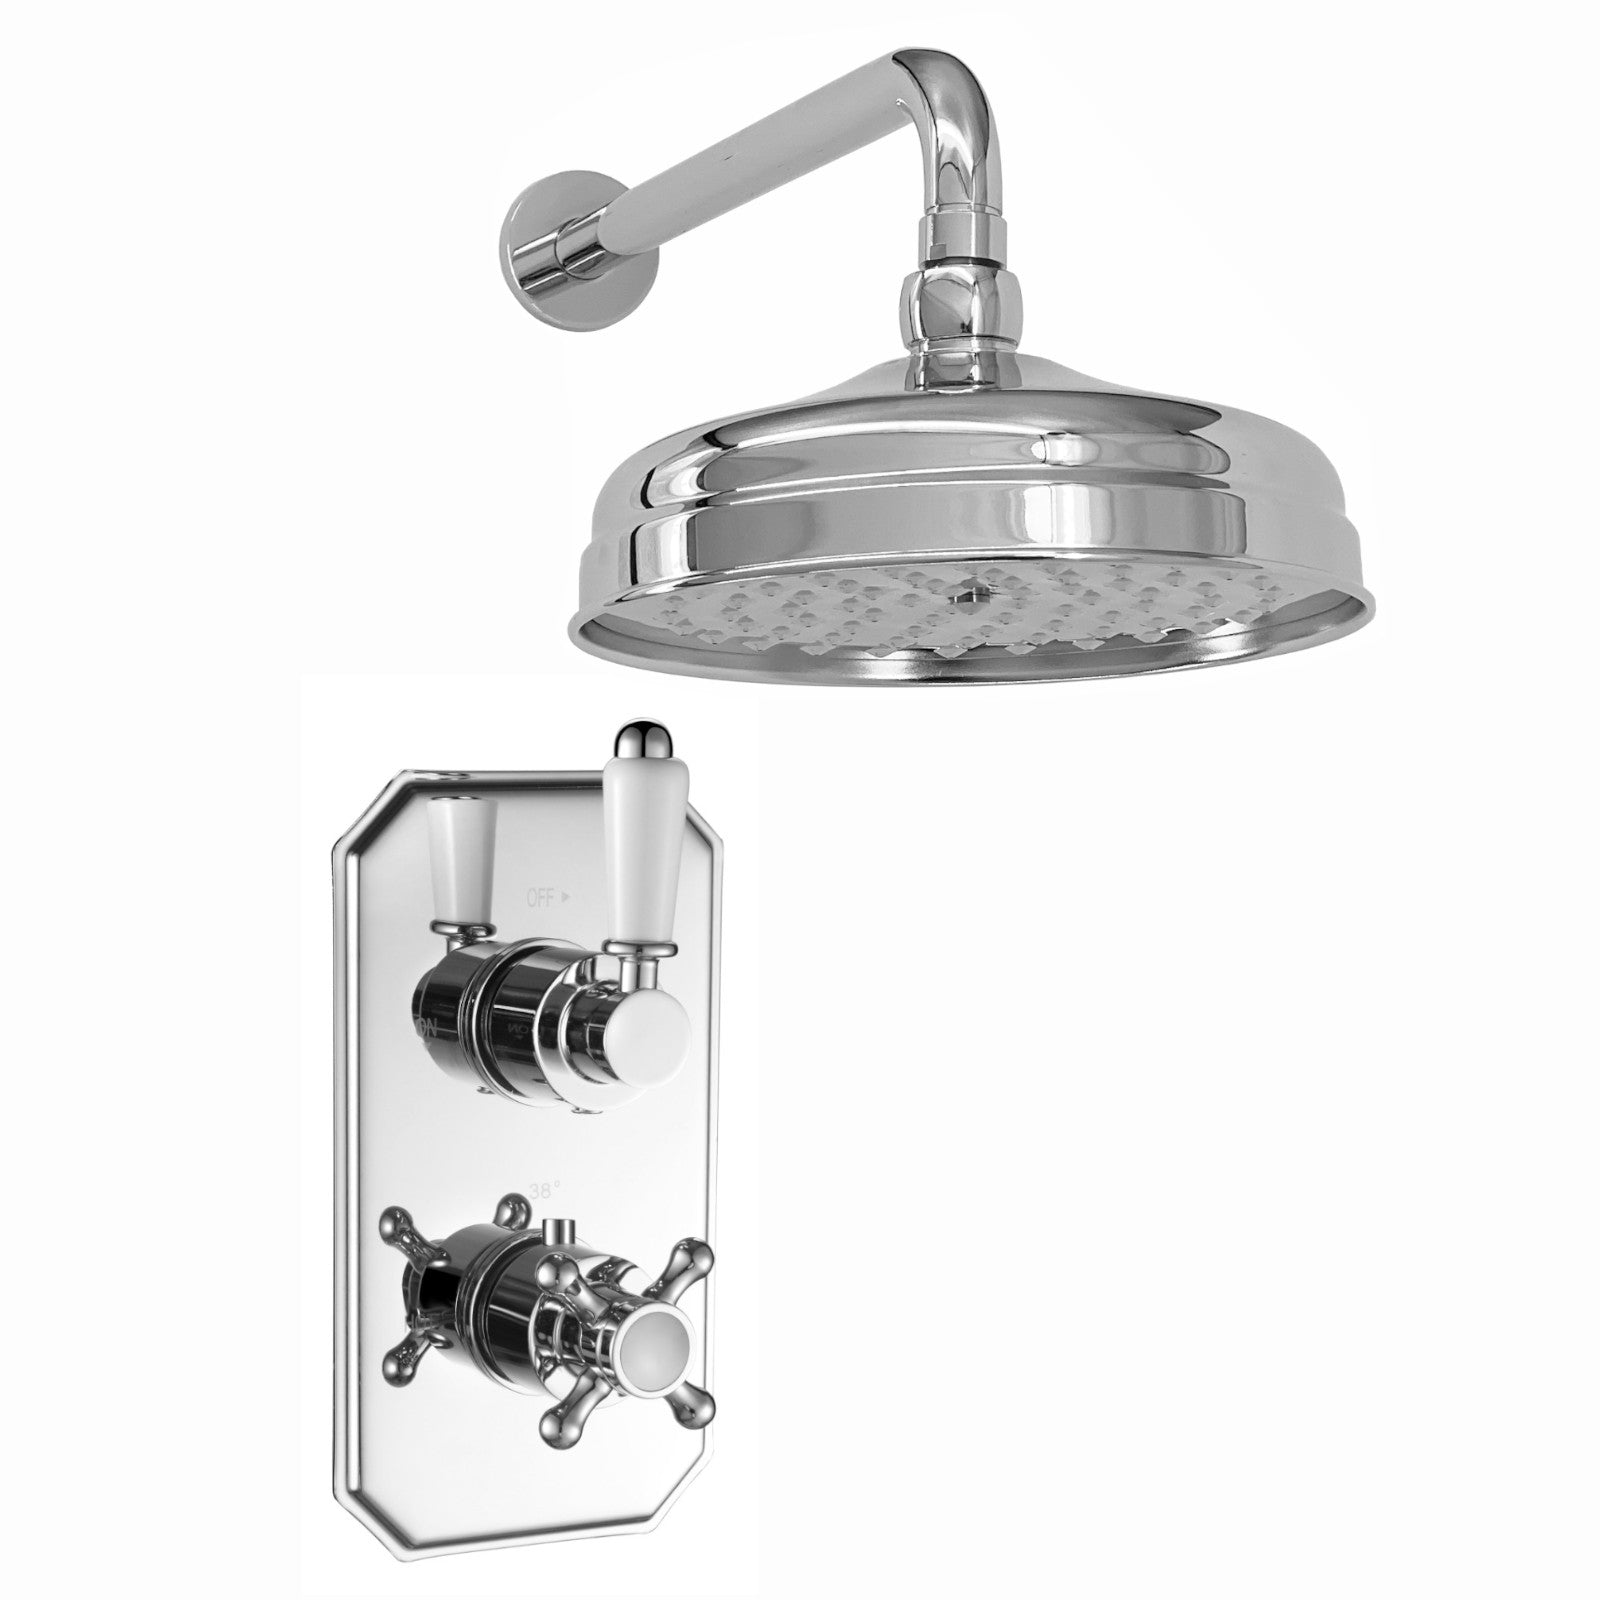 SH0266-01-regent-traditional-crosshead-and-white-lever-concealed-thermostatic-shower-set-wall-fixed-8-shower-head-chrome-1-outlet